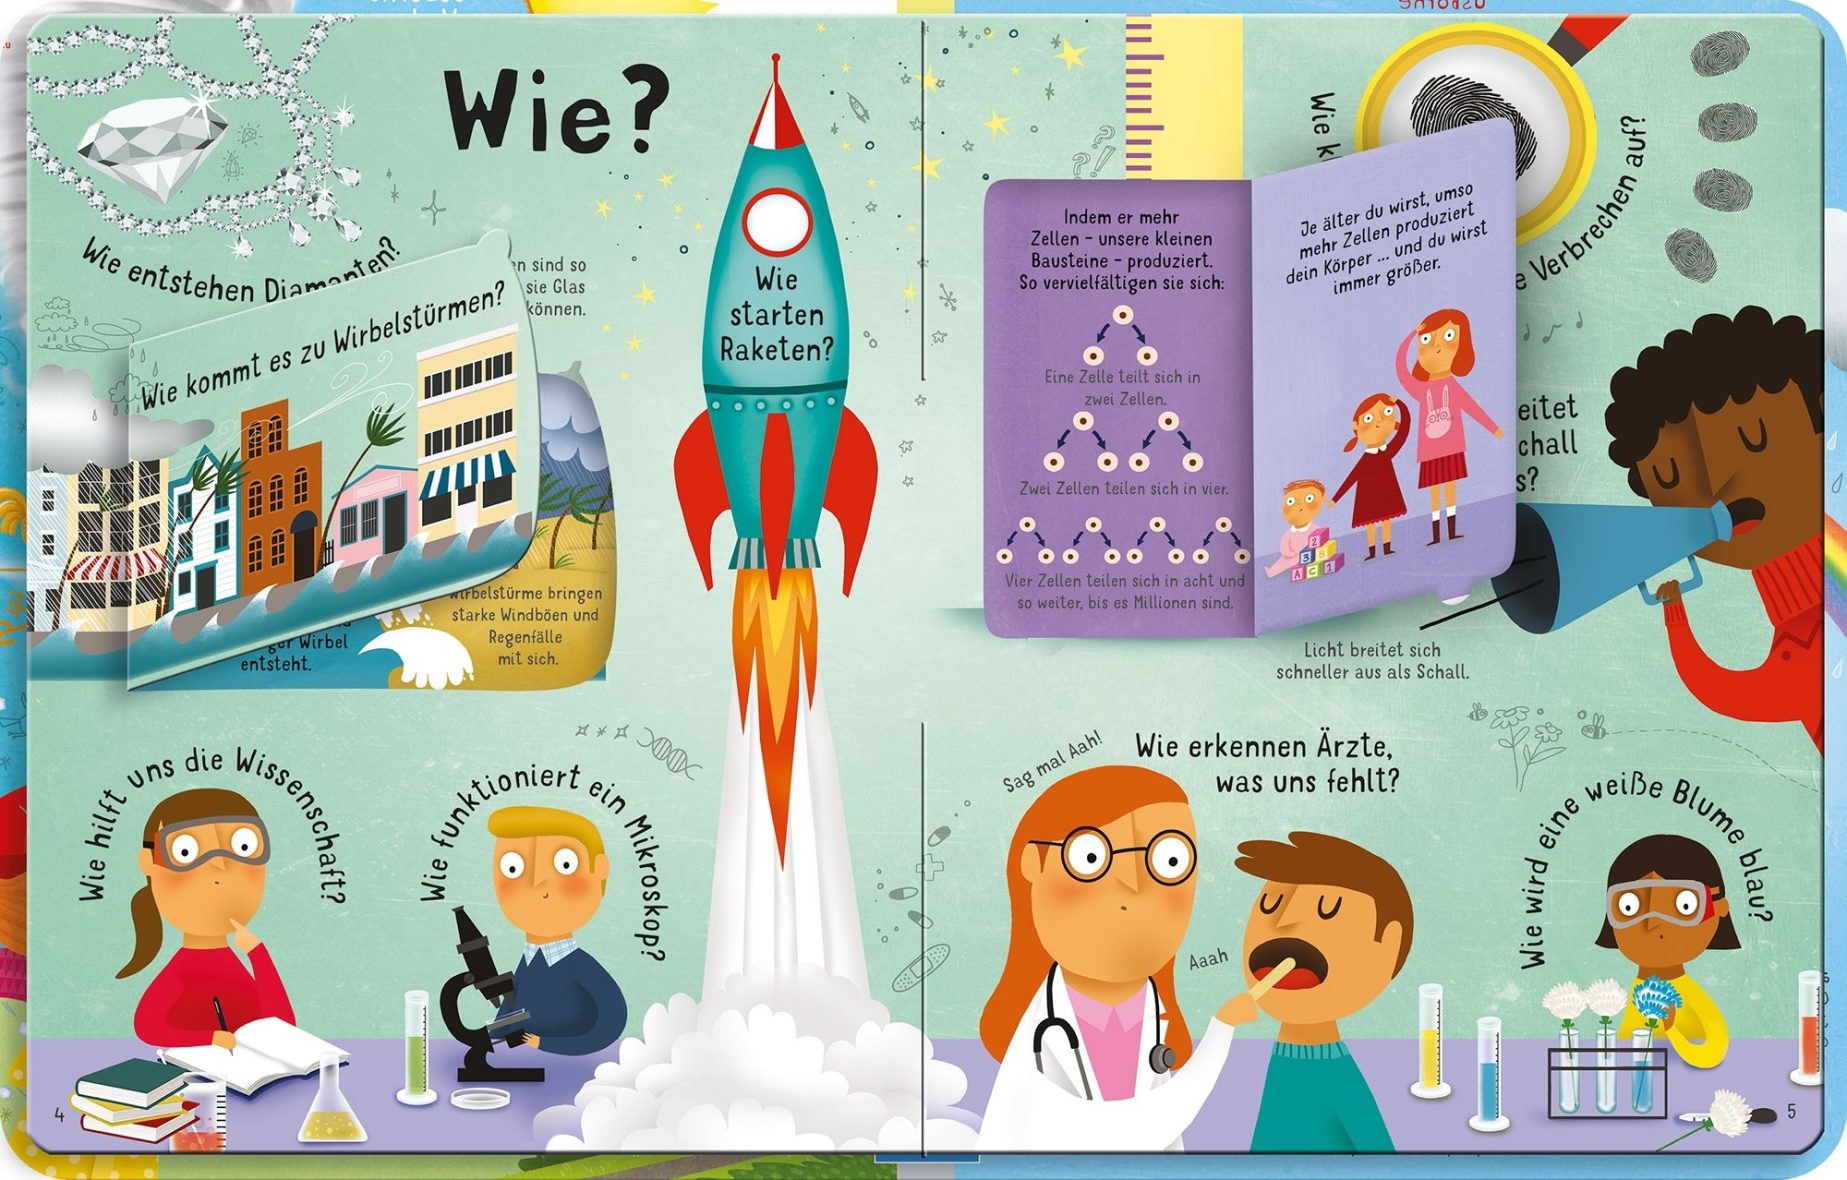 Usborne Lift the Flap question answers about science 3